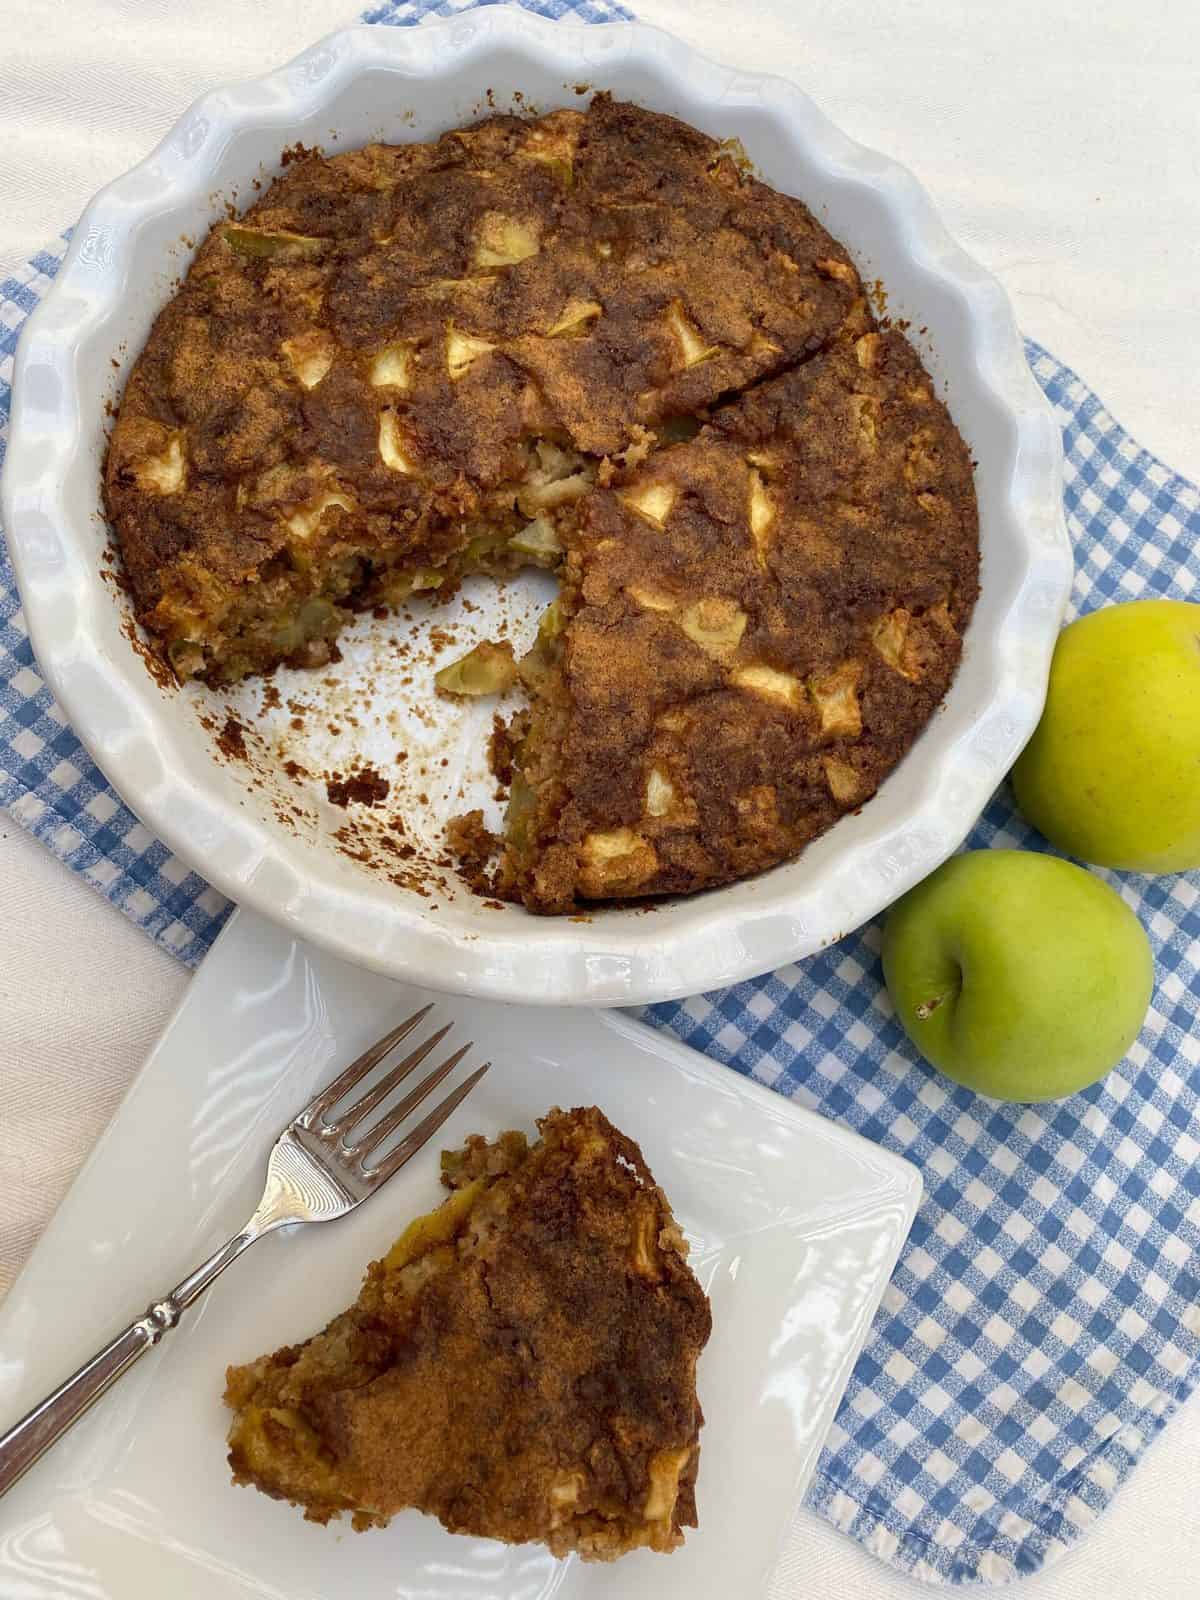 A wedge of apple cake with the baking dish and and apples in the background.